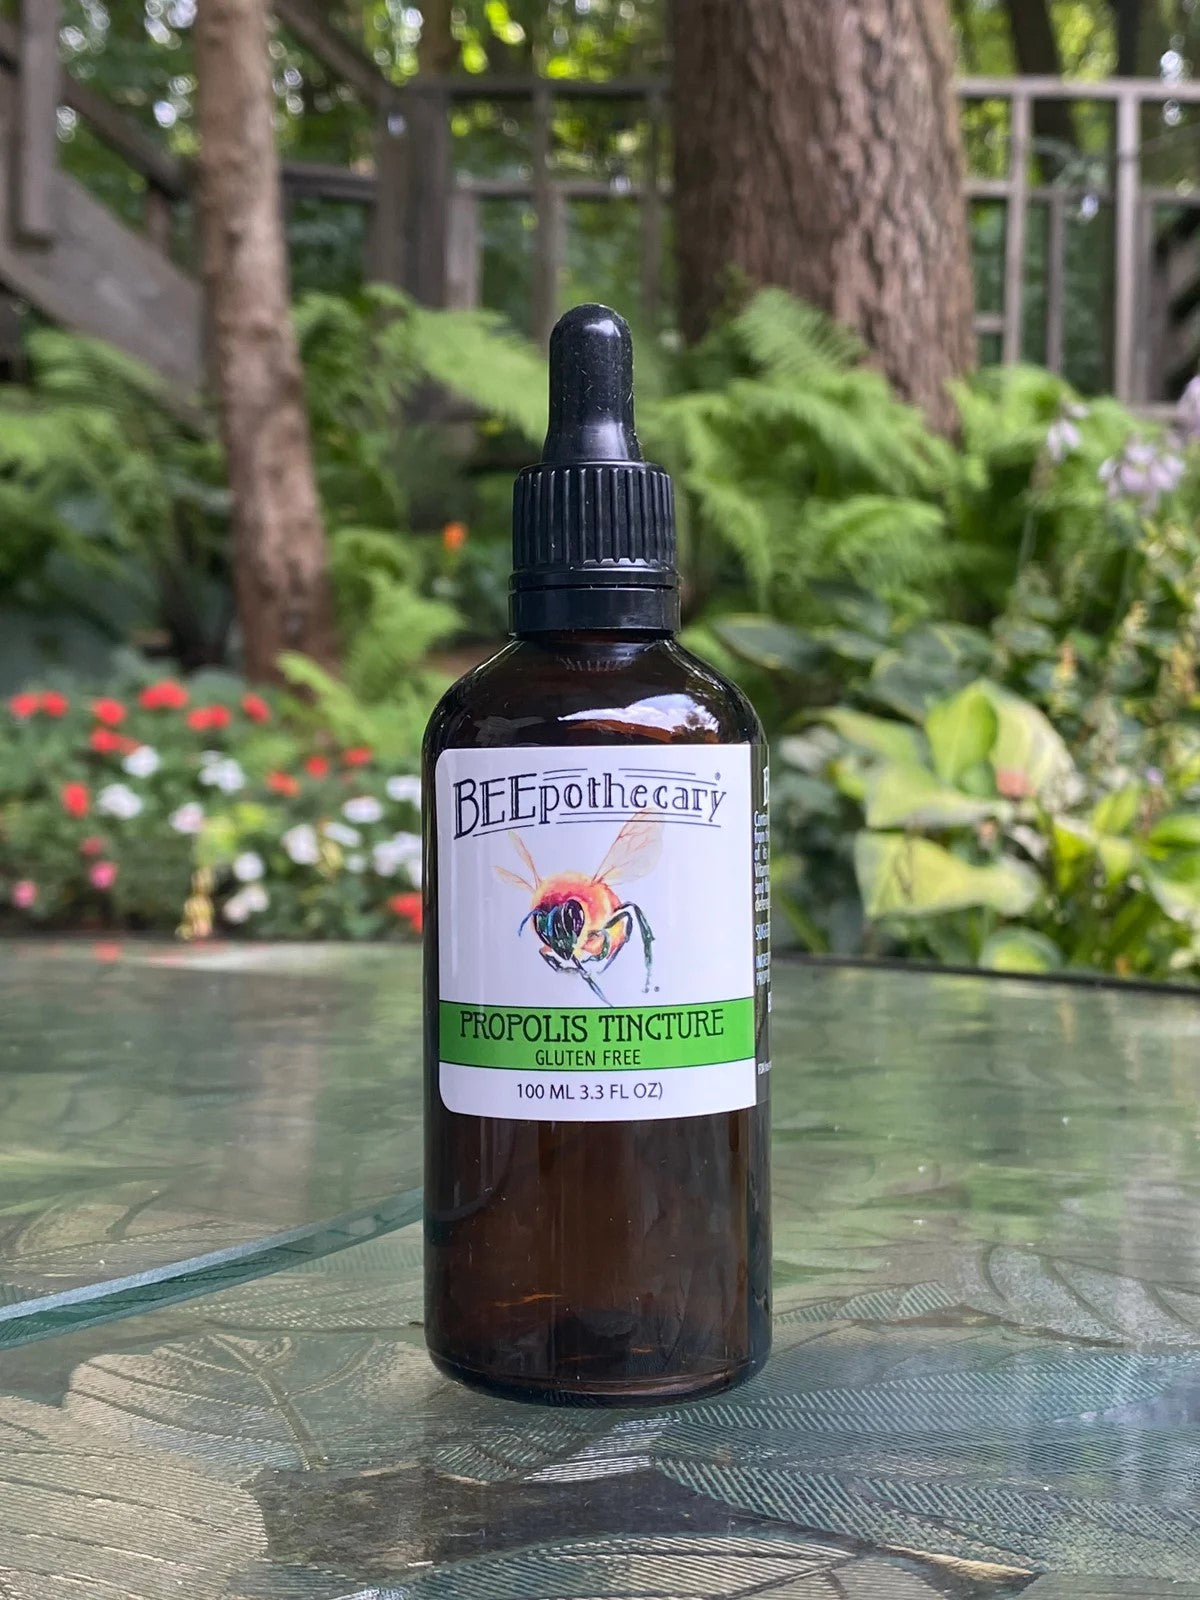 BEEpothecary Propolis Tincture Gluten Free in 100 ml brown bottle with white label and dropper.